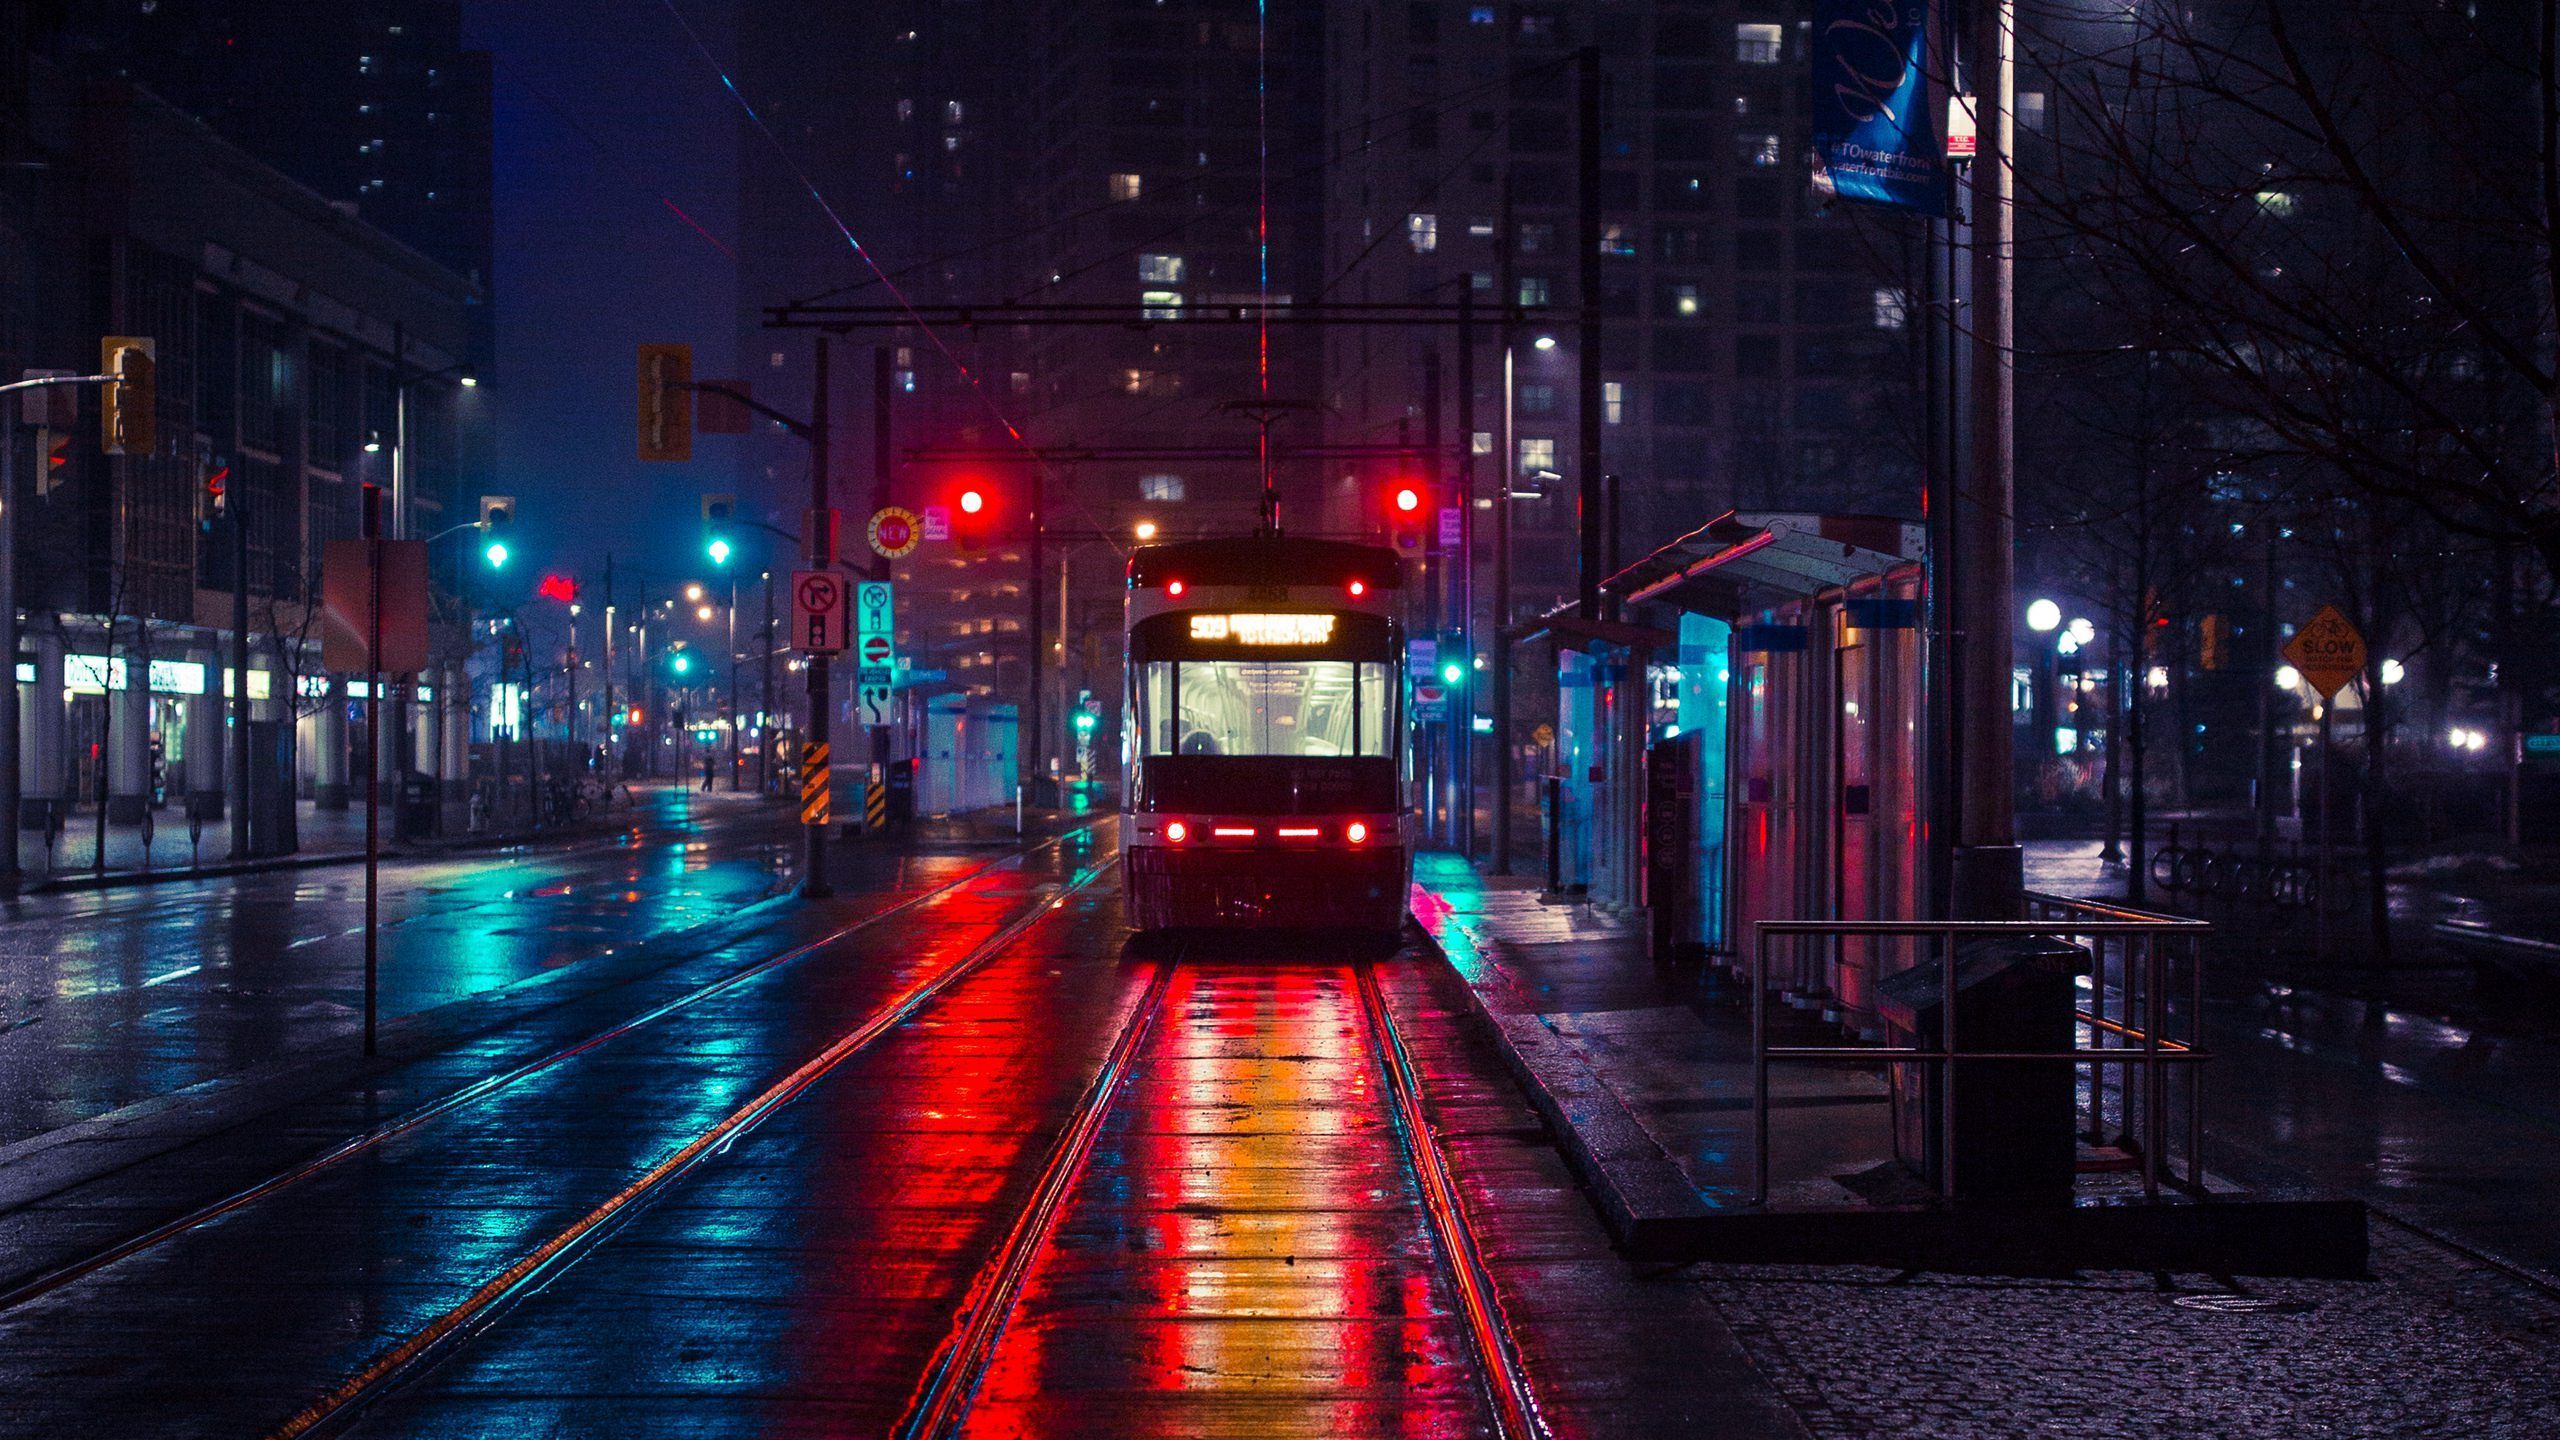 Trolley At Night [2560x1440]. City wallpaper, Aesthetic desktop wallpaper, Desktop wallpaper 1920x1080